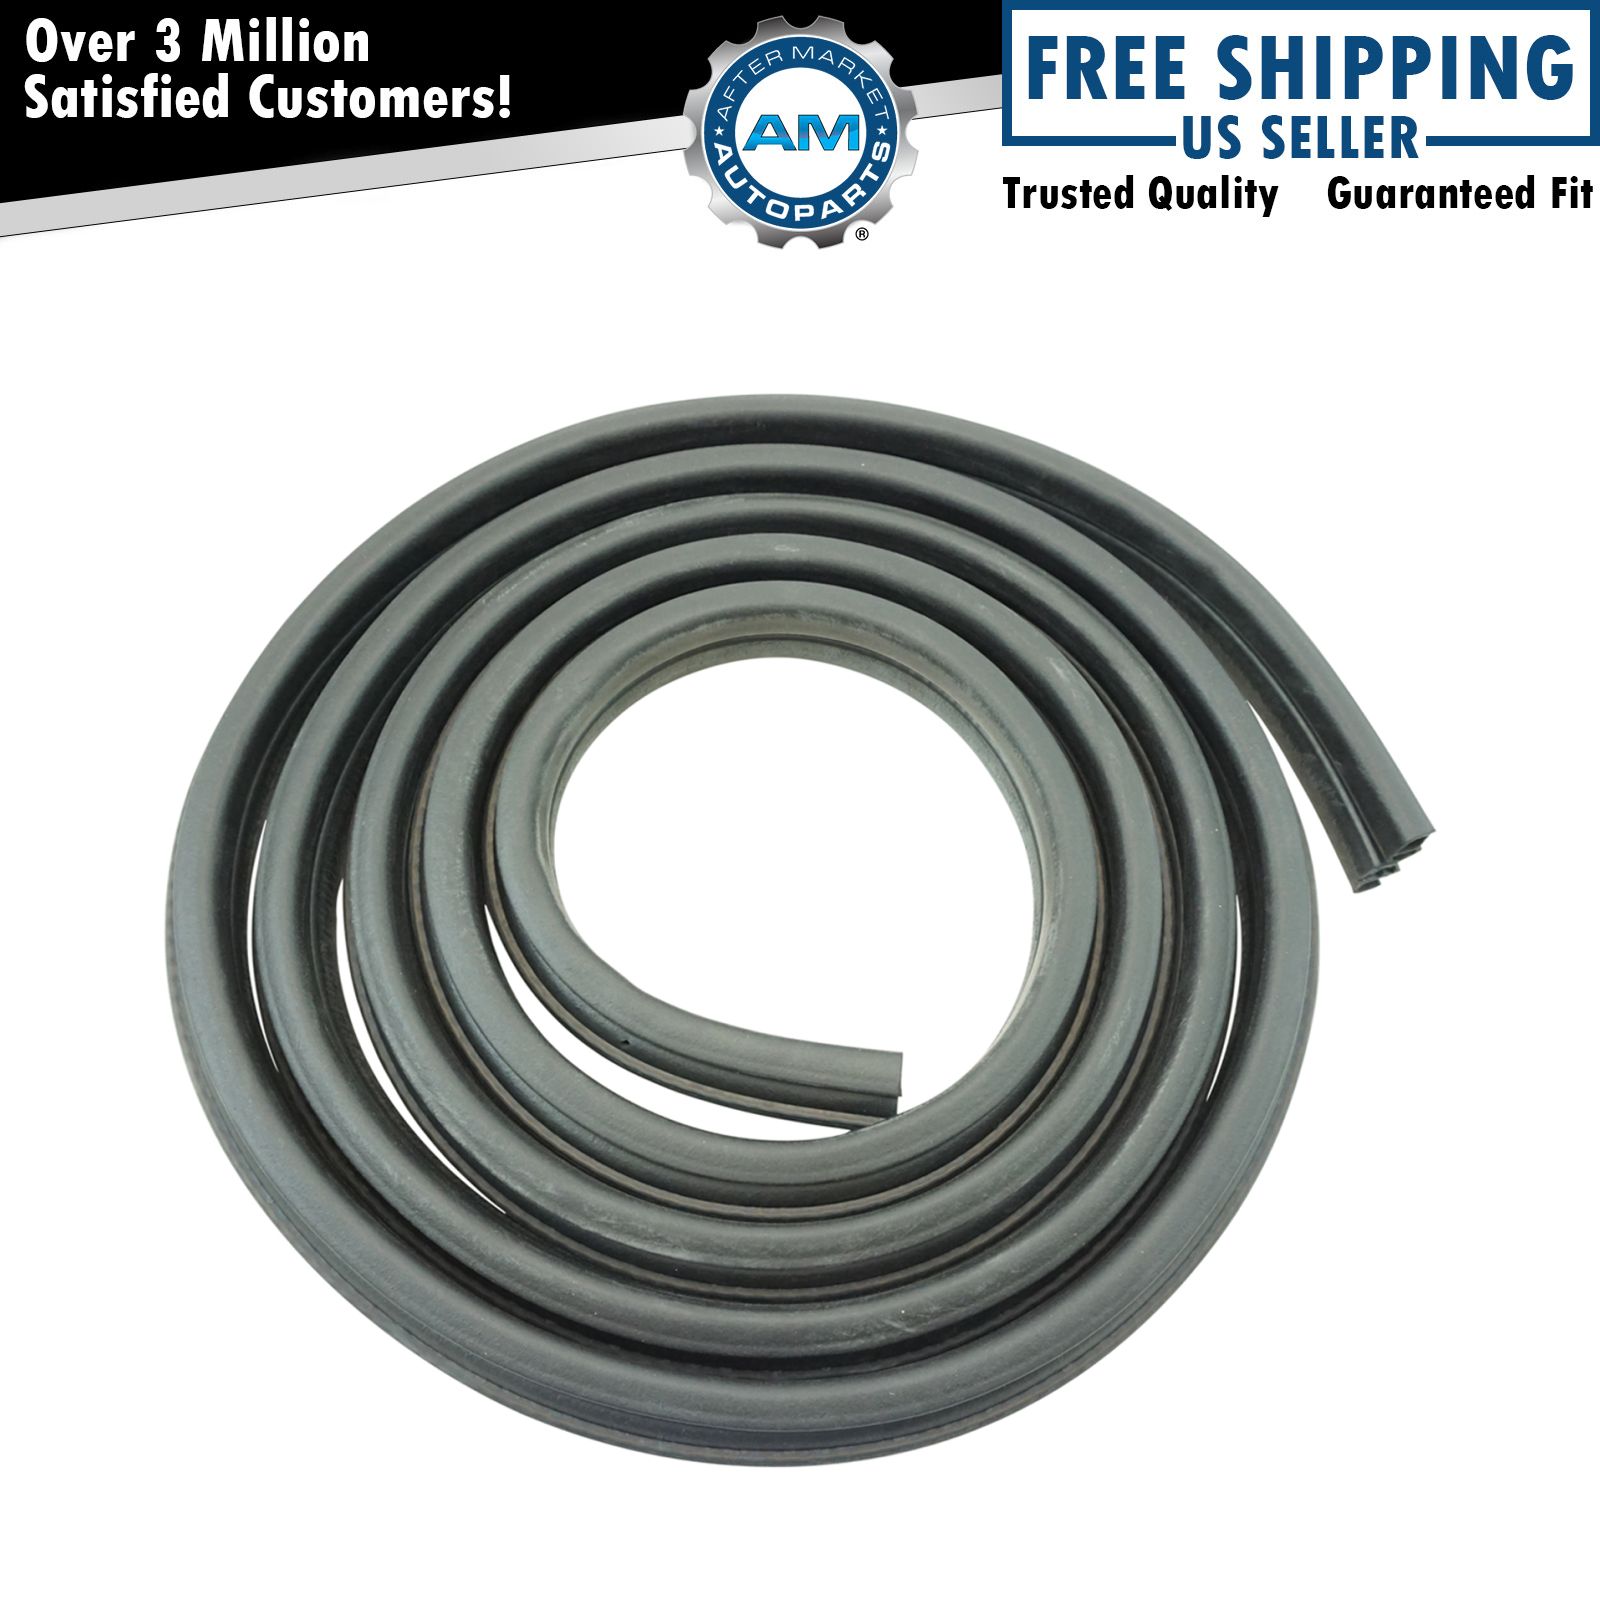 Front Body Mounted Door Weatherstrip Seal LH or RH for Ford Pickup Truck New